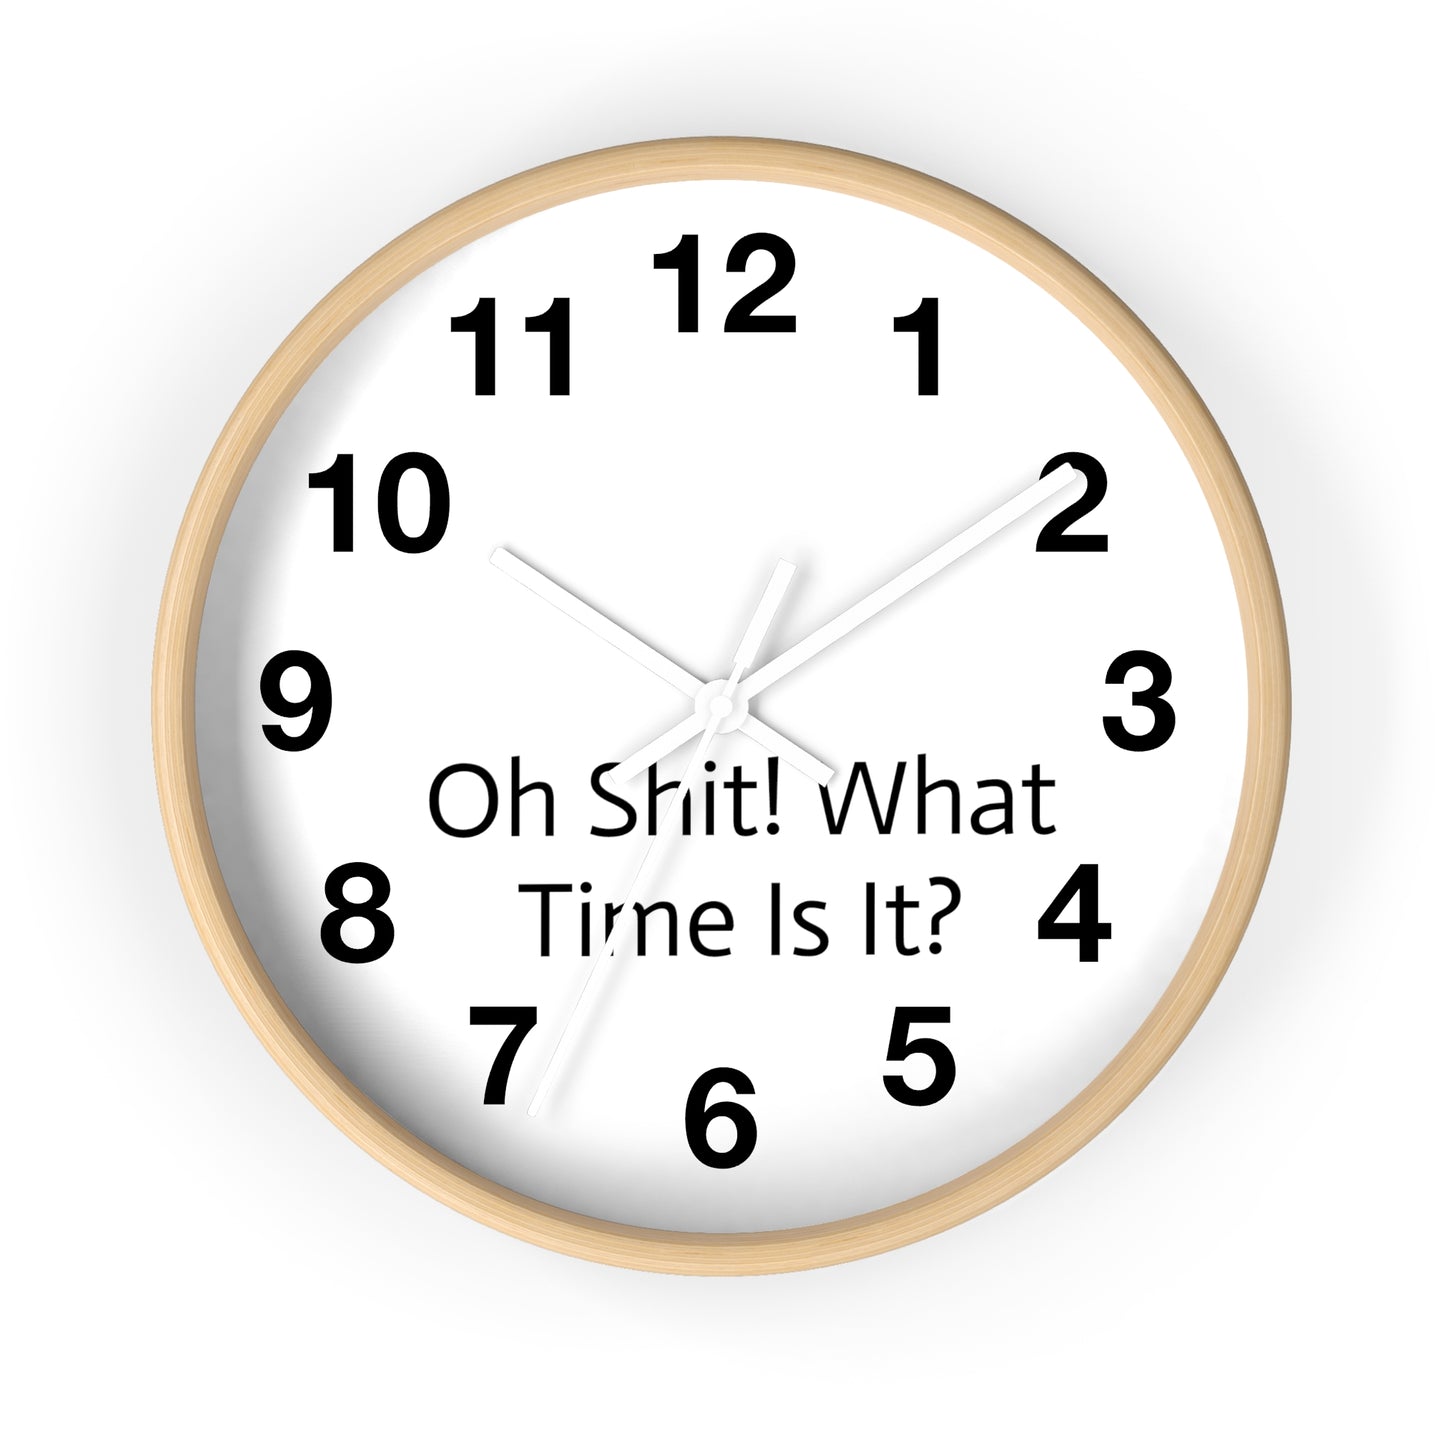 "Oh Shit! What Time Is It?" Wall Clock: Humor Meets Timekeeping